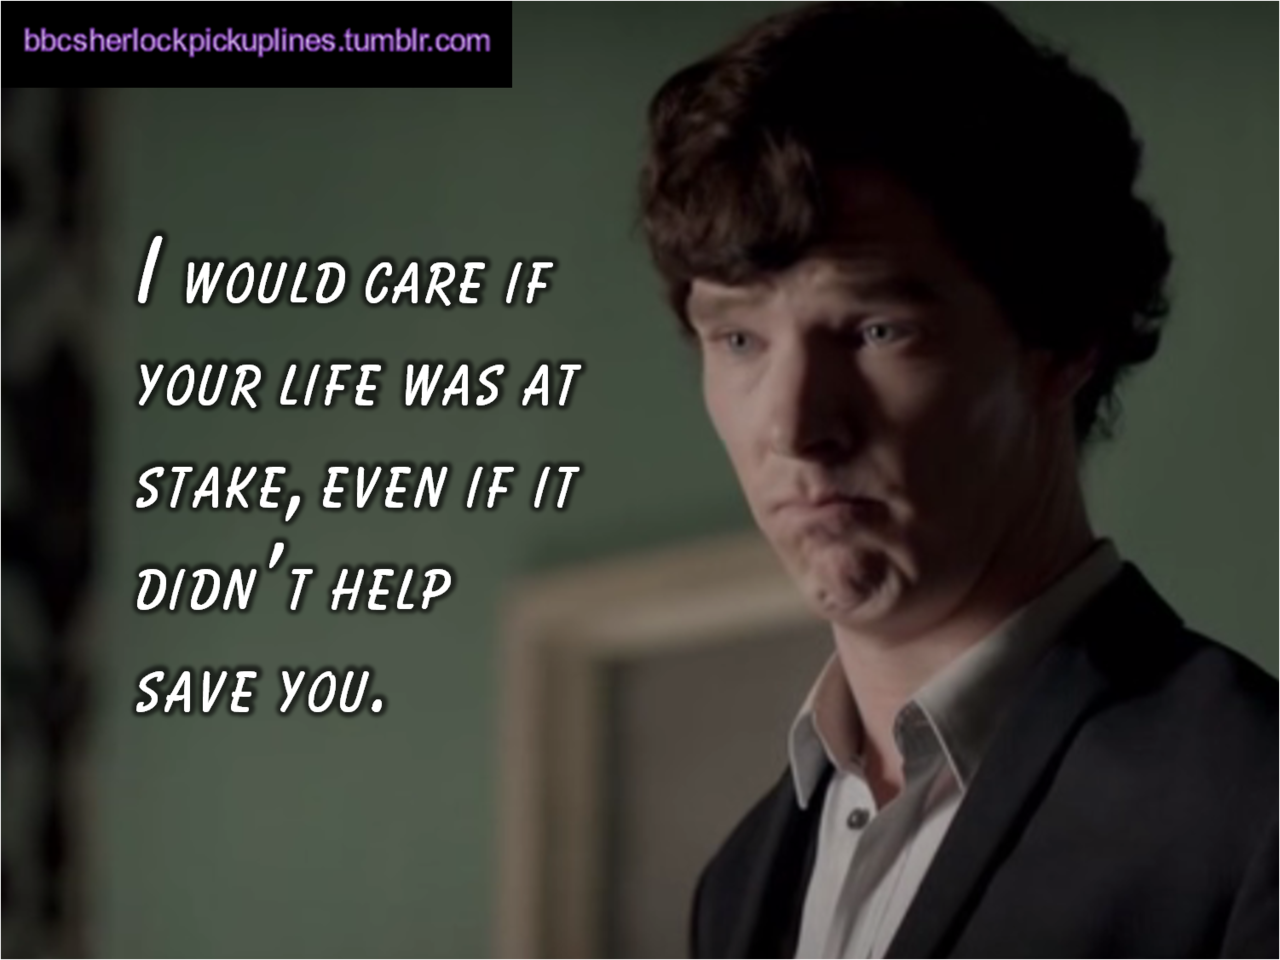 The best of Sherlock Holmes&rsquo;s facial expressions, from BBC Sherlock pick-up